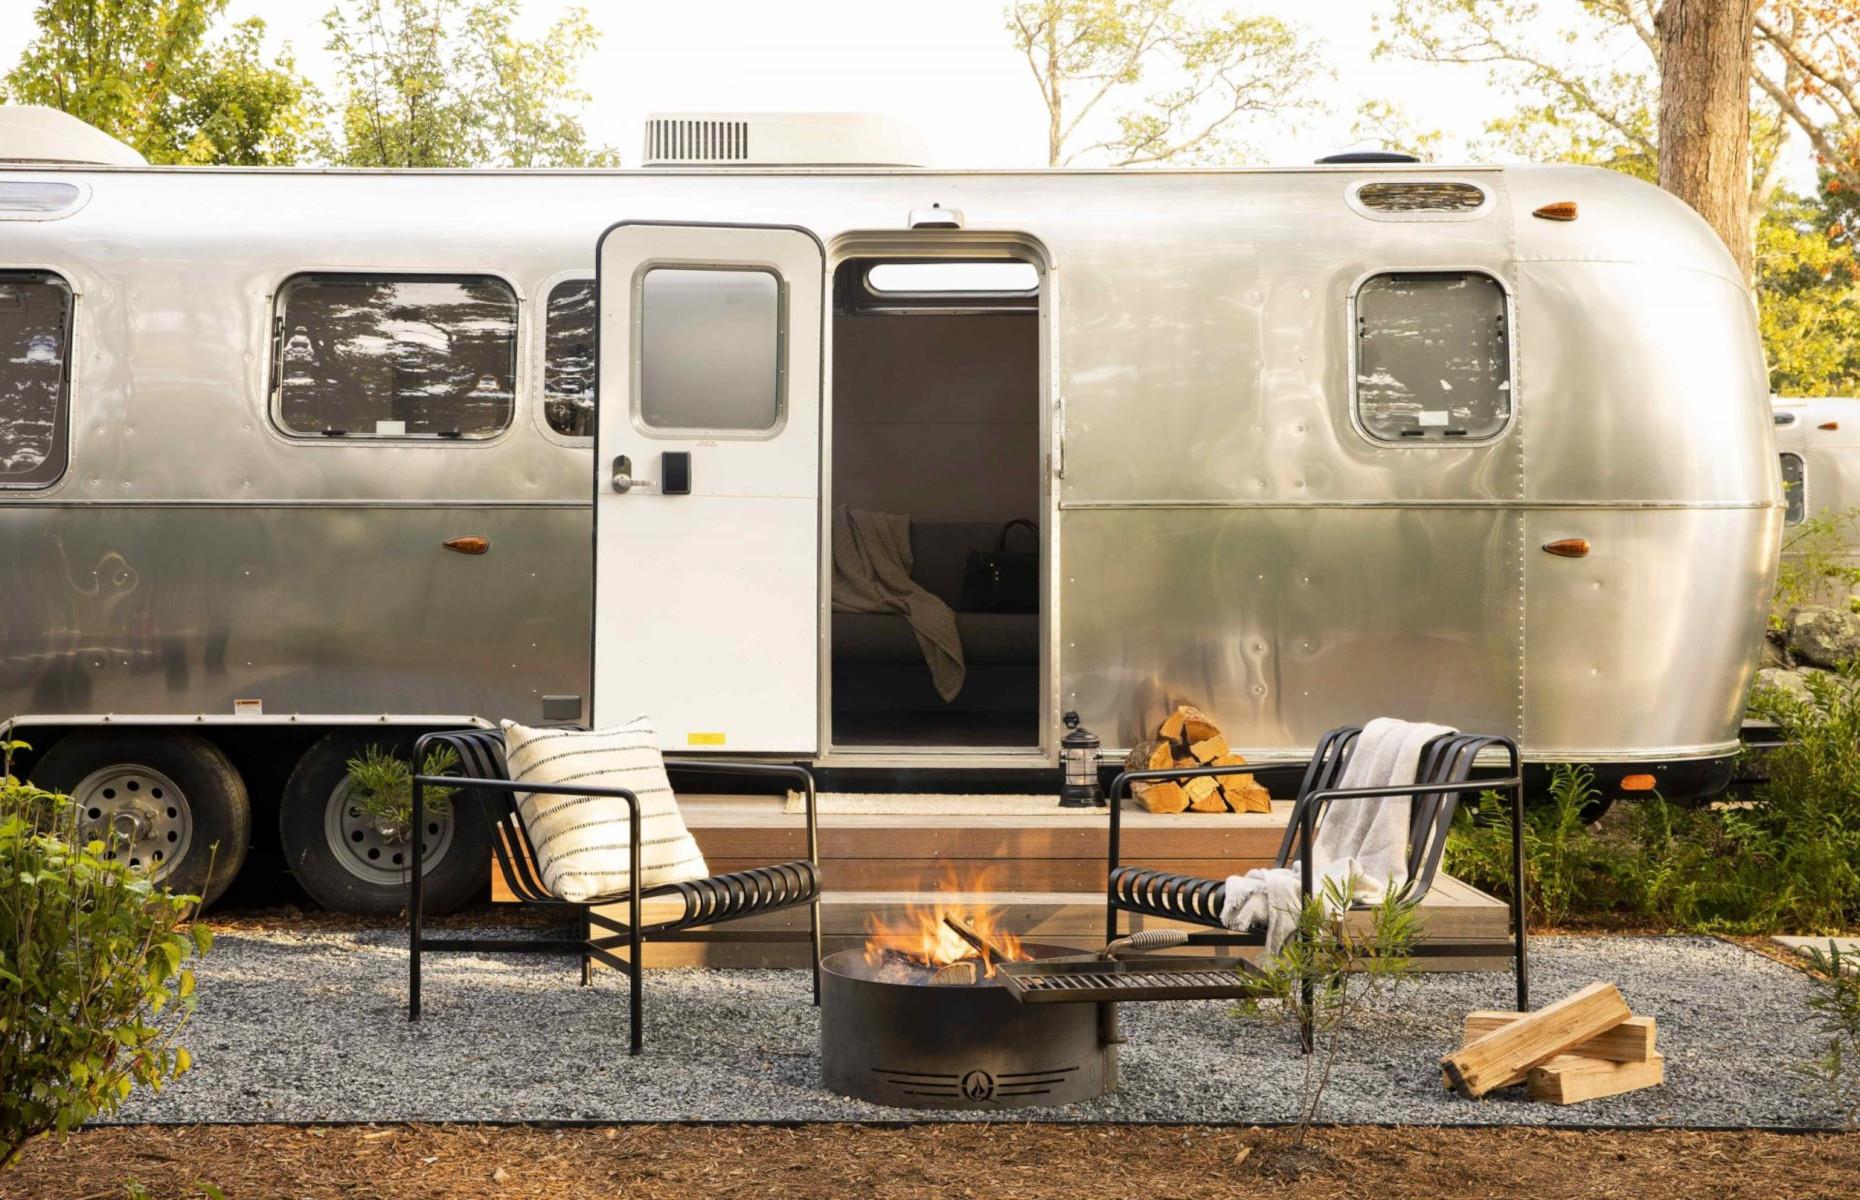 <p>Perfect for a luxurious romantic getaway or even a family adventure, these Cape Cod <a href="https://autocamp.com/property/cape-cod-premium-airstream-suite/">Premium Airstream Suites</a> are the height of decadent comfort in the midst of the great outdoors. Design and durability meet, with beautifully designed interiors enclosed in that classic aluminum shell.</p>